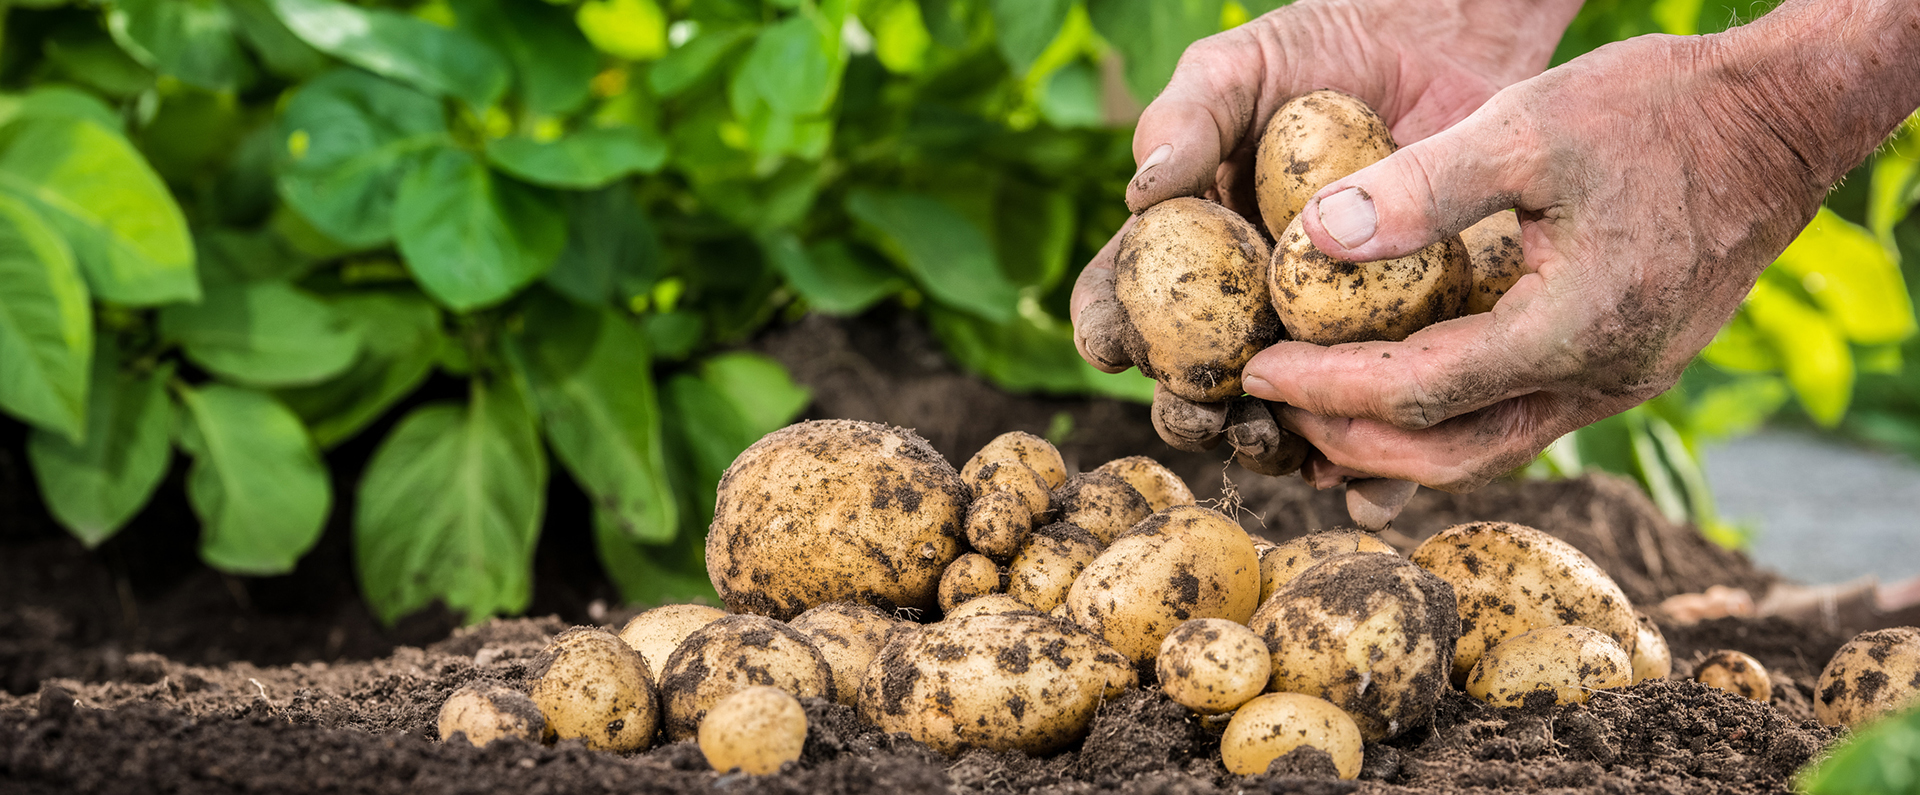 Two hands holding freshly dug potatoes over a small pile of harvested potatoes